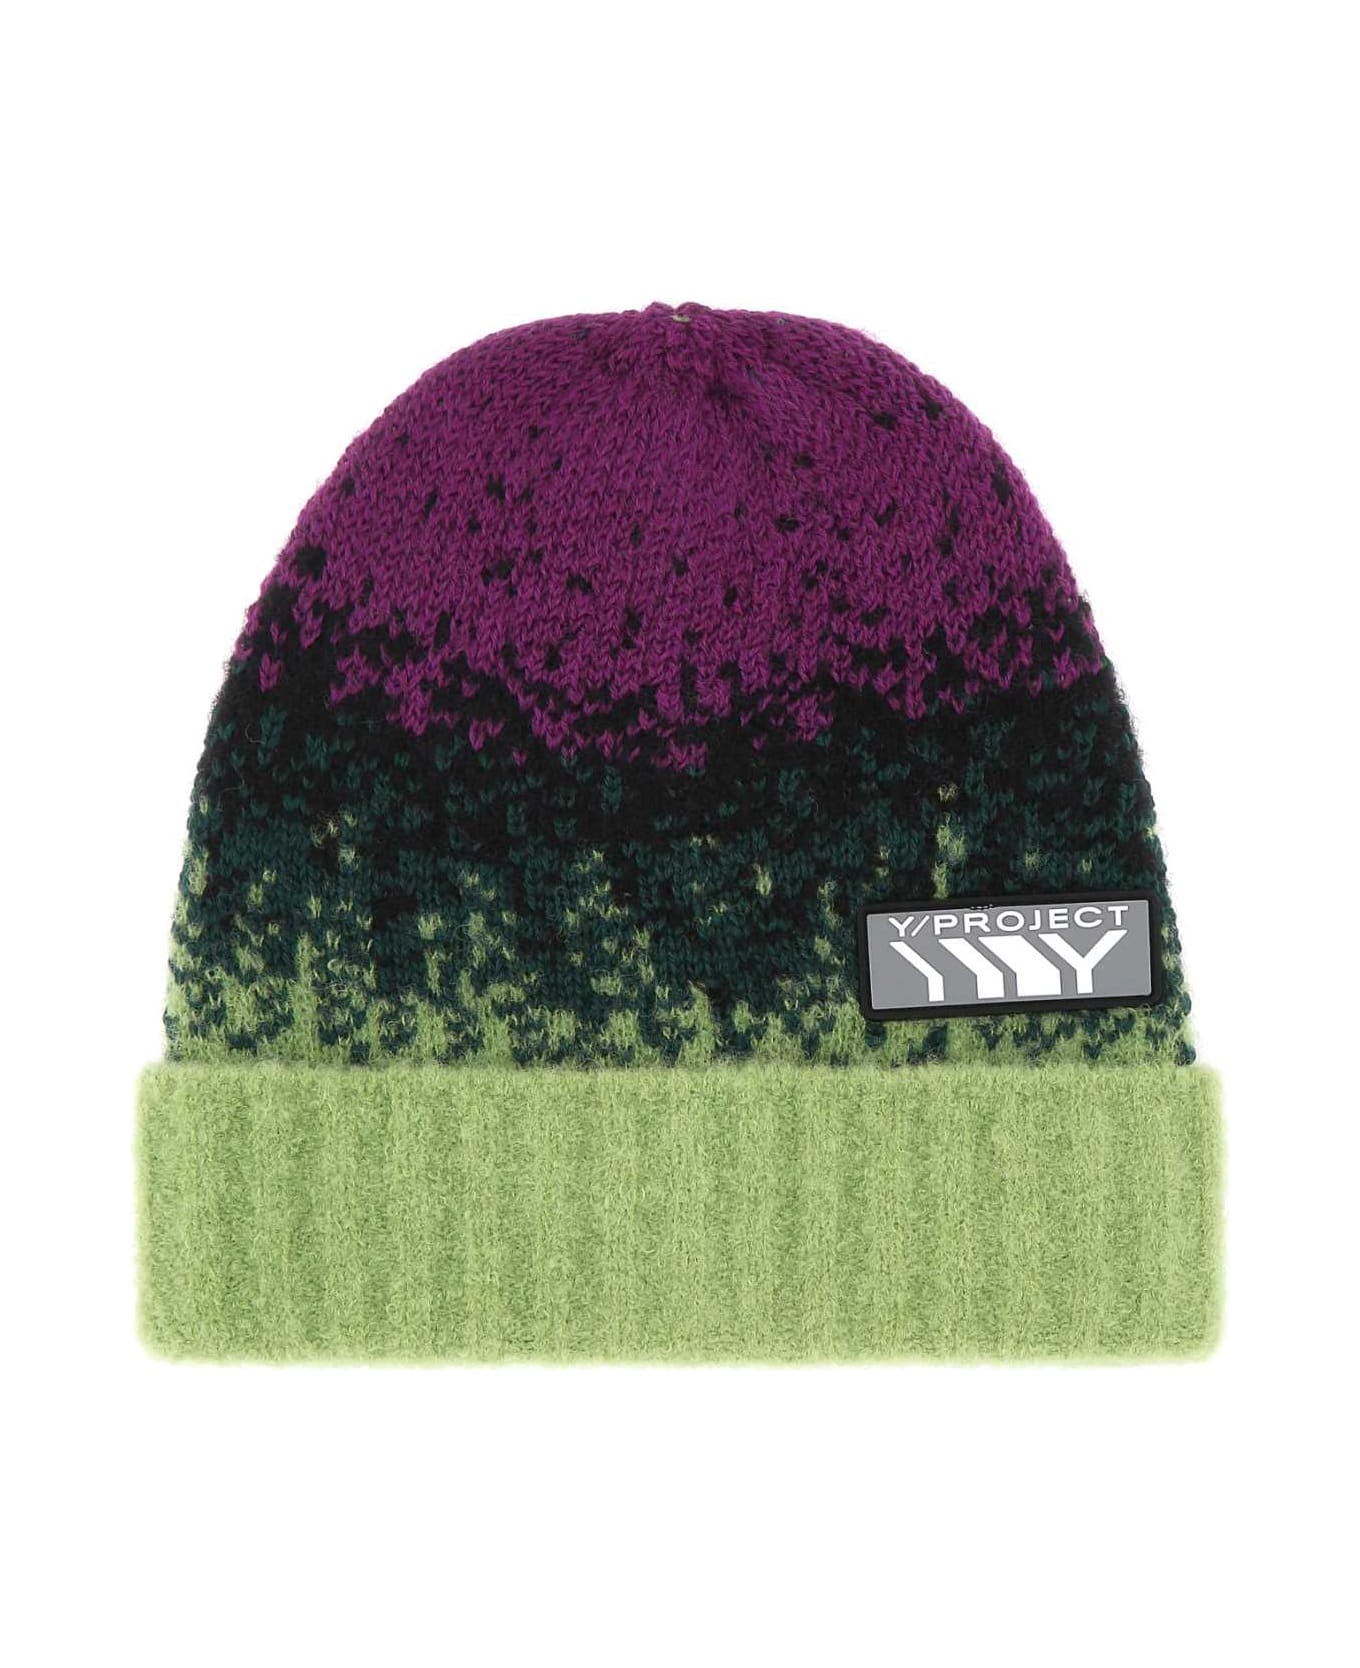 Y/Project Multicolor Stretch Wool Blend Beanie Hat - GREYELGRE